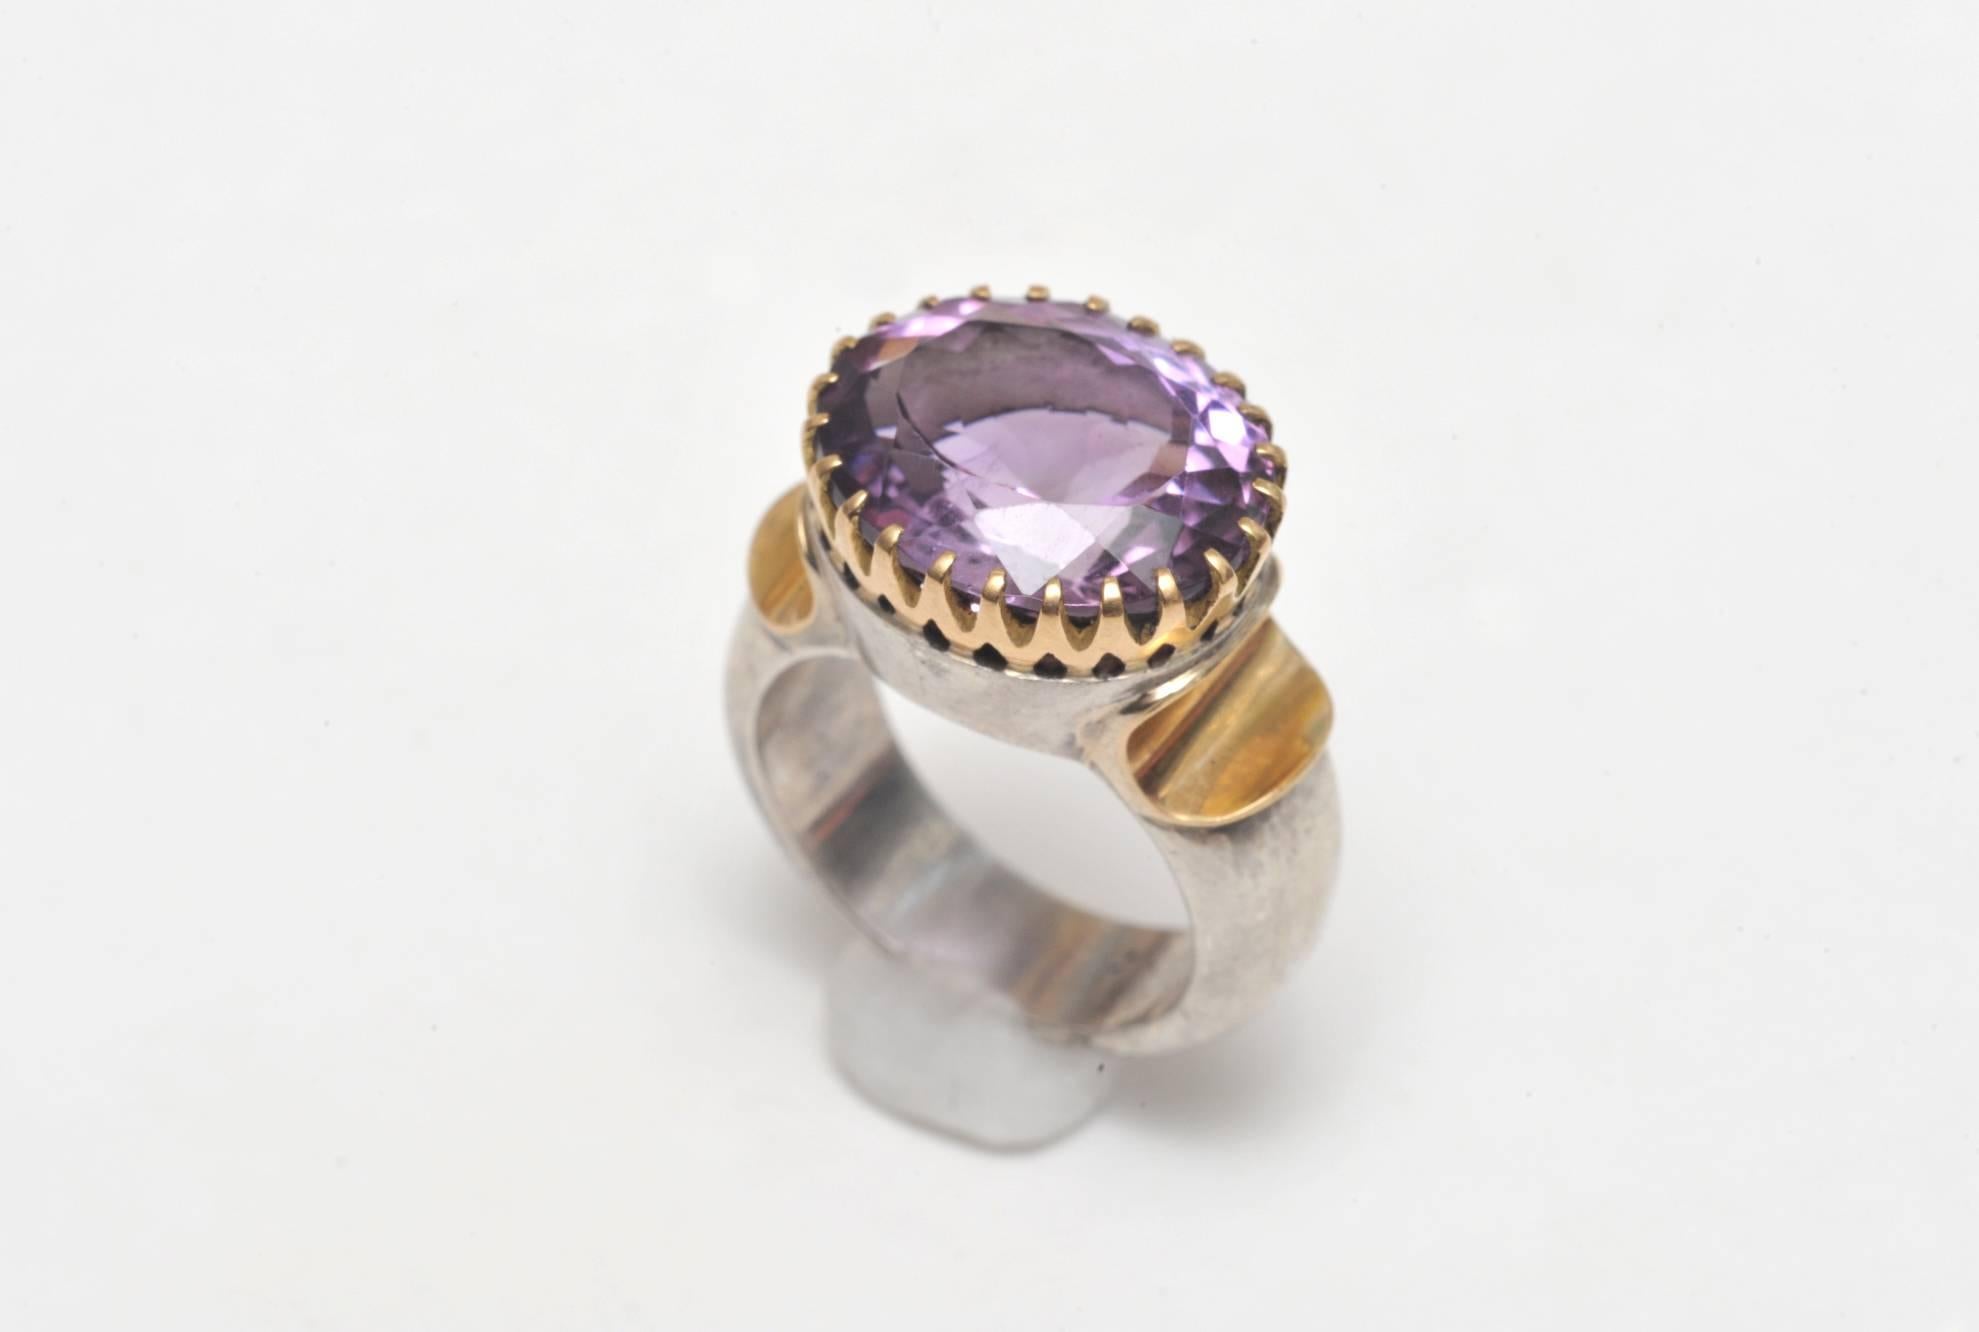 Spectacular 18K gold (weighted, not plated) and sterling silver ring with large, bezel-set faceted amethyst with great color and clarity.   Size is 7.25.  Carat weight of amethyst is 15.

Fine jewelry located on Nantucket Island